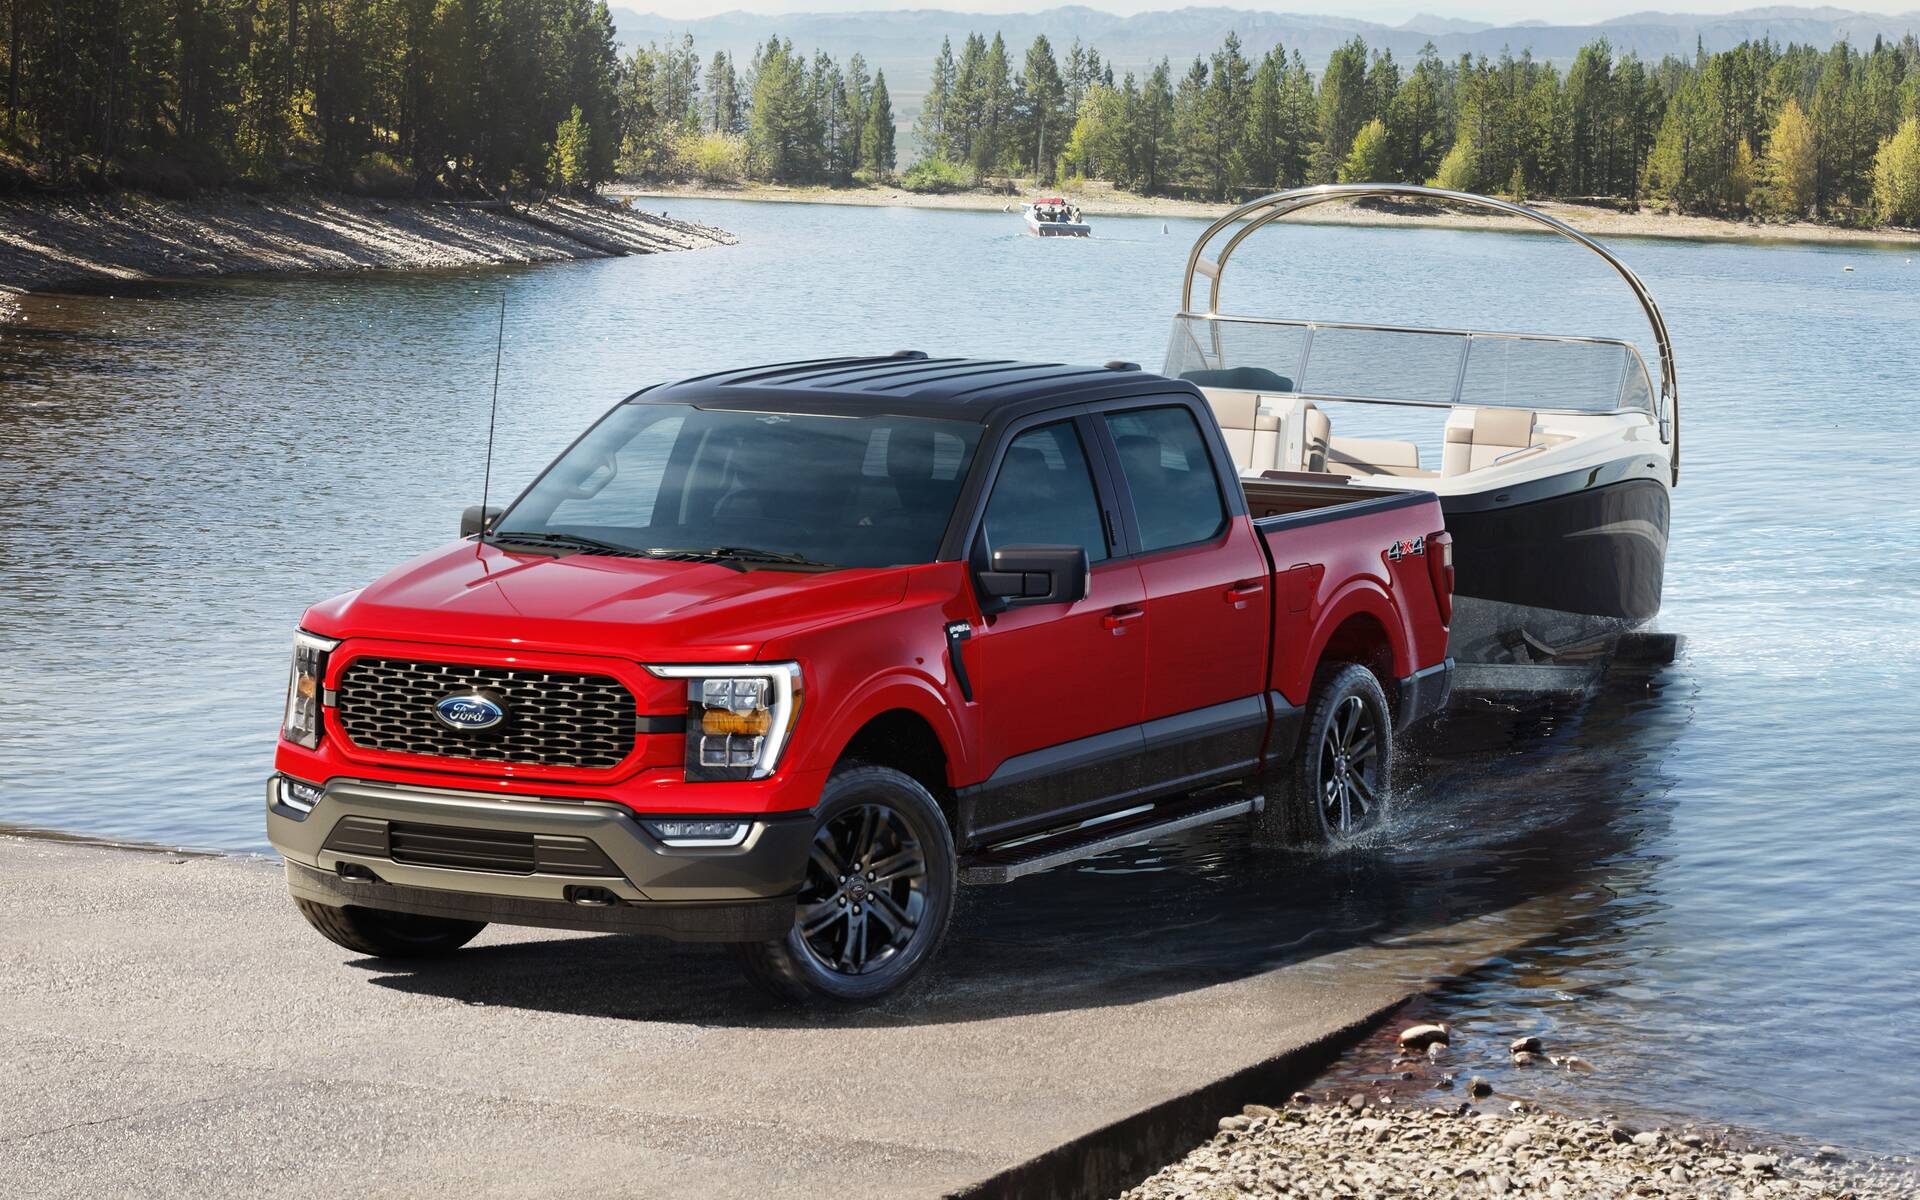 2023 Ford F150 Heritage Edition Celebrates 75 Years of FSeries Trucks